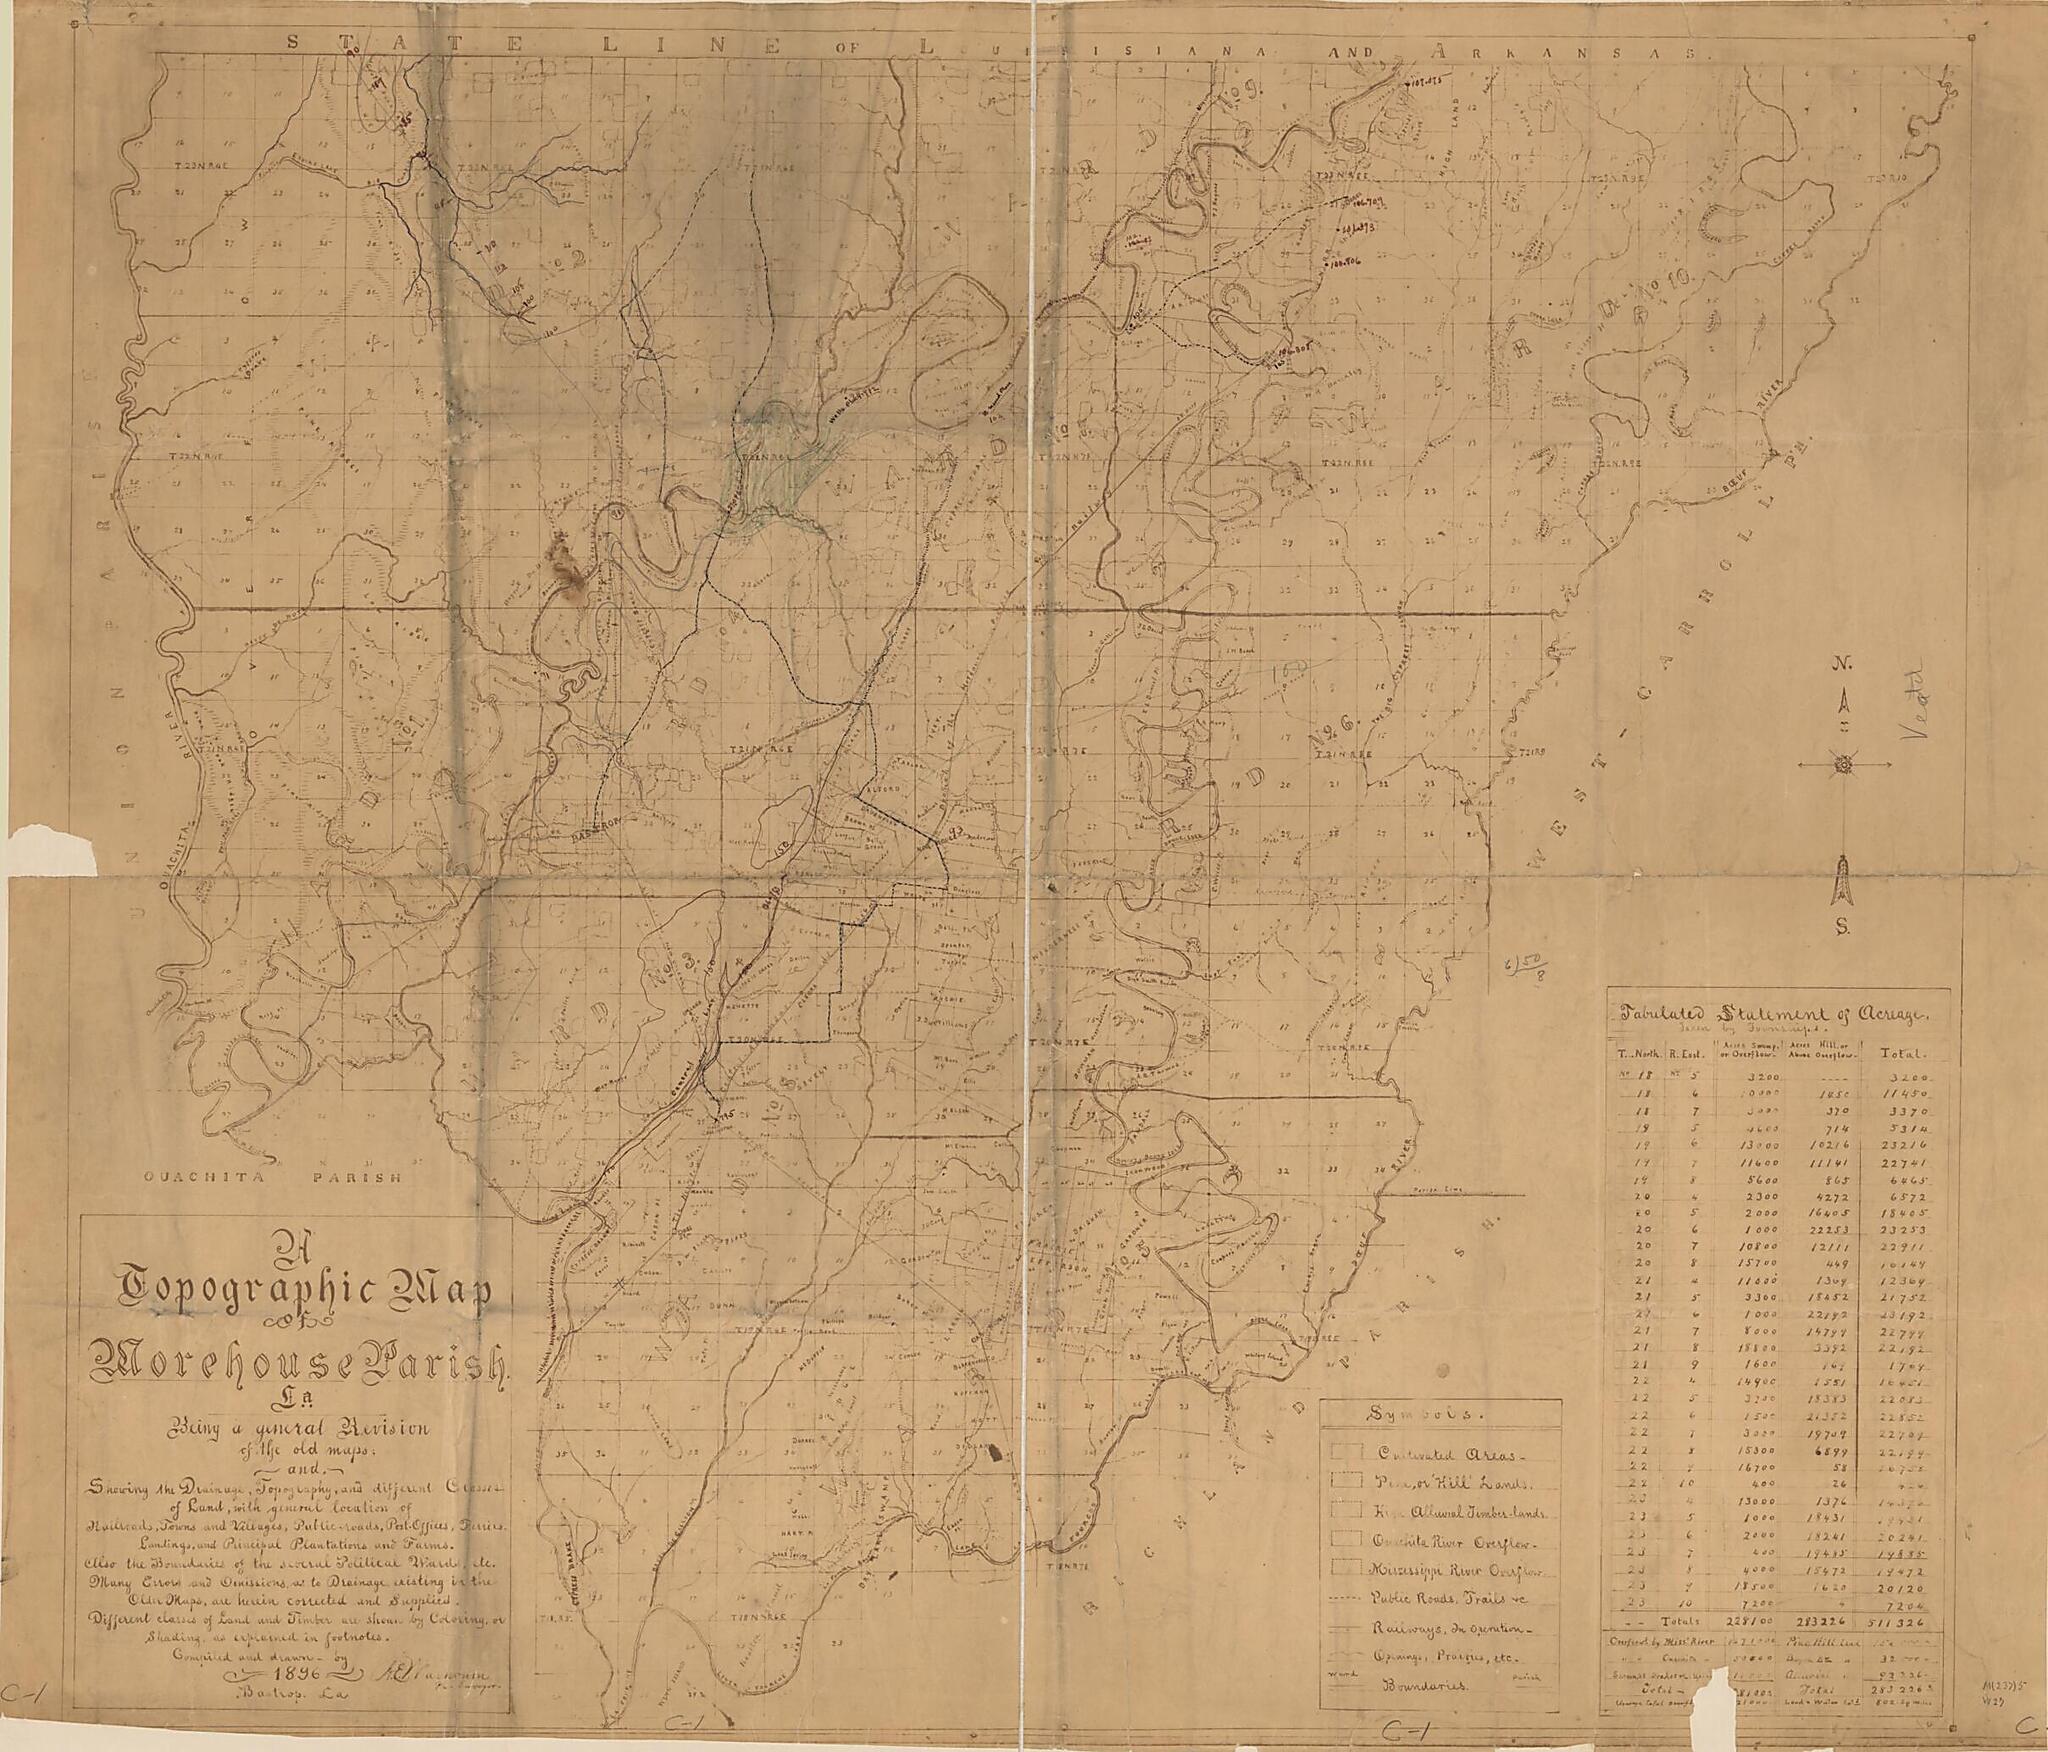 This old map of A Topographical Map of Morehouse Parish, La. : Being a General Revision of Old Maps from 1896 was created by A. E. Washburn in 1896